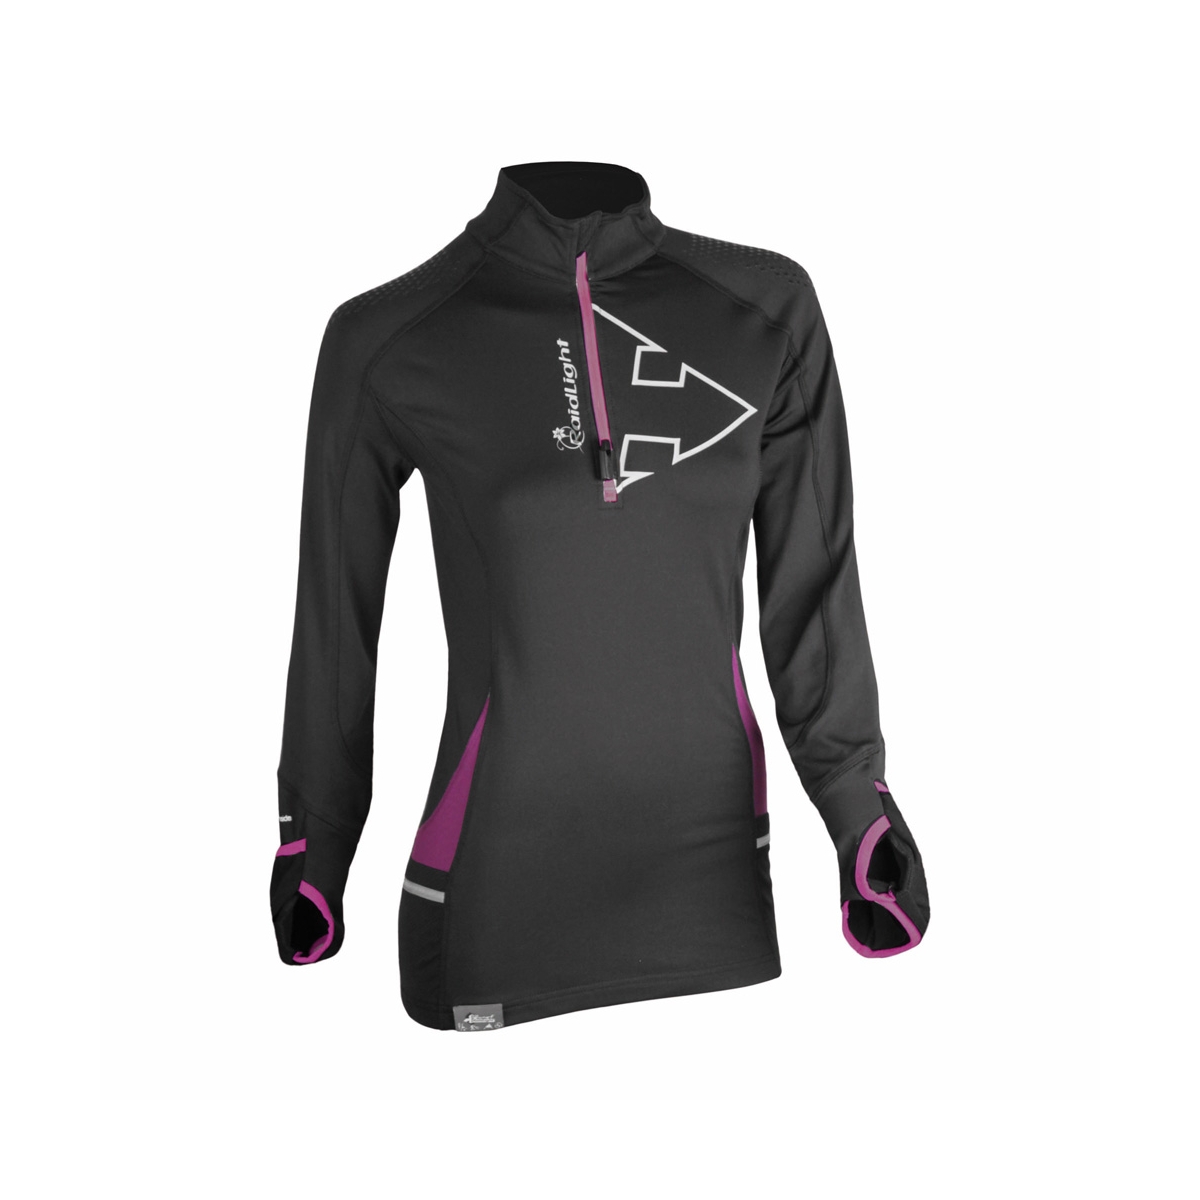 Maillot manches longues wintertrail lady